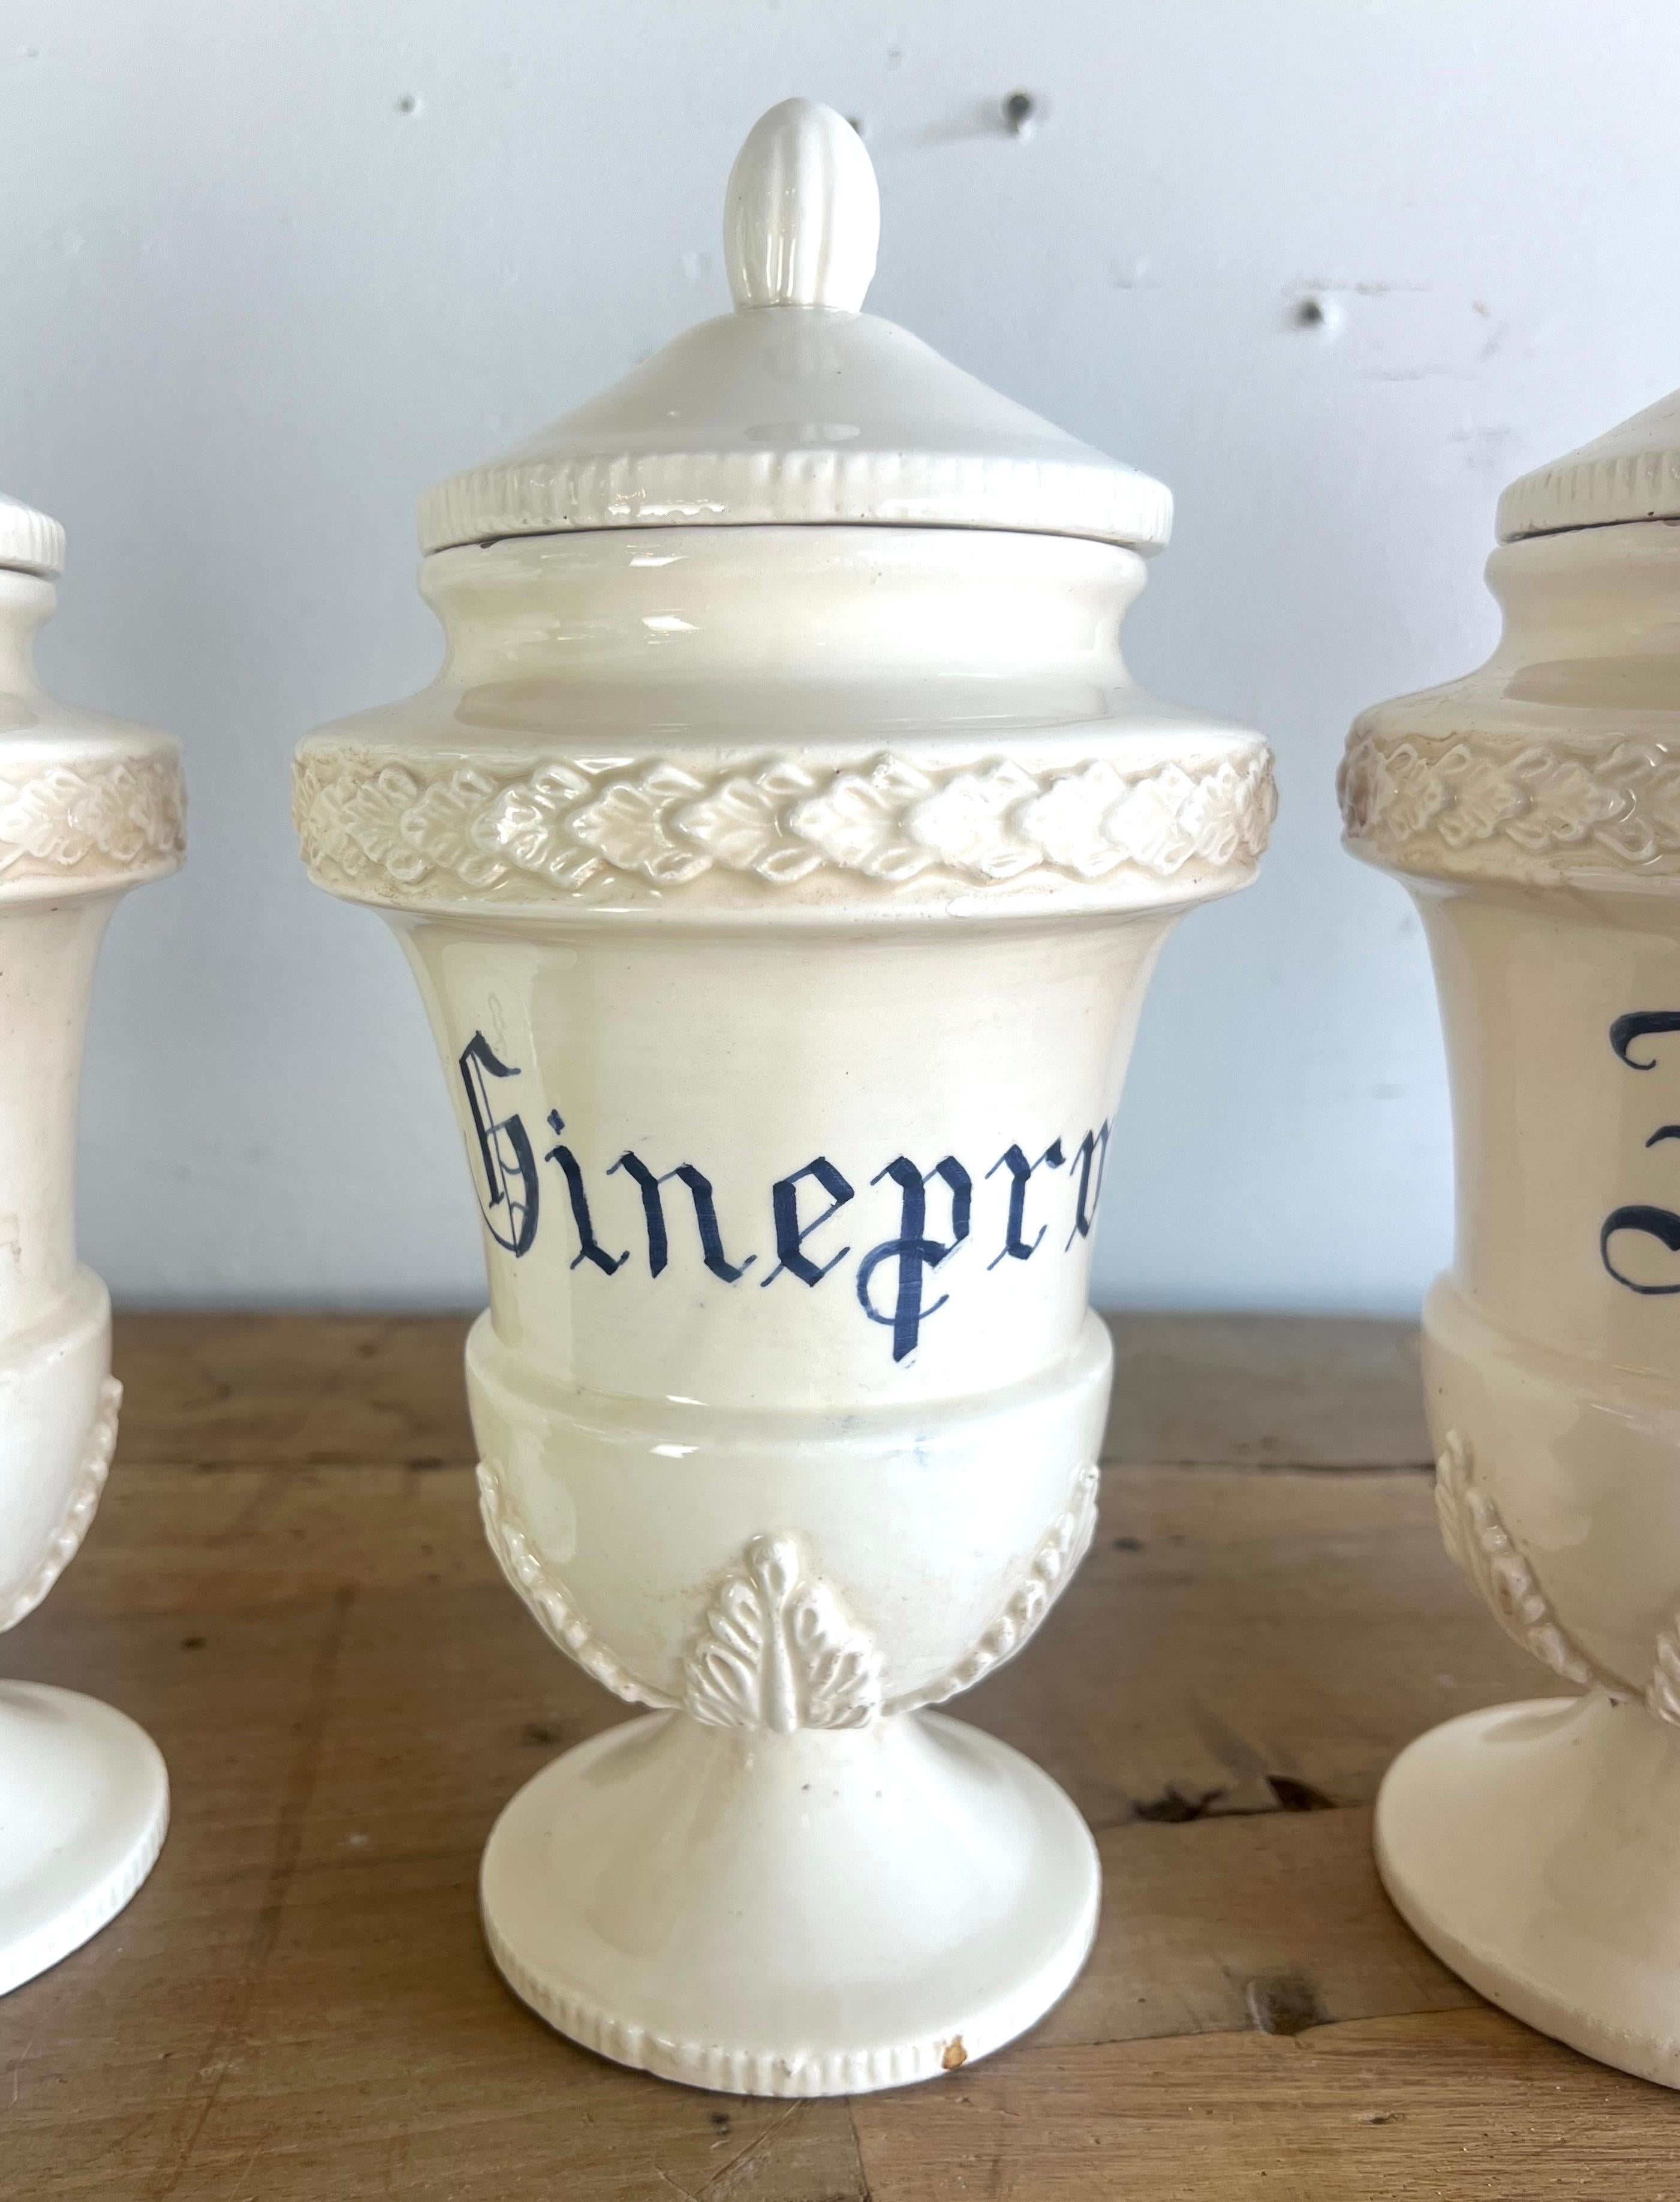 Set of eight Italian ceramic Apothecary Jars with lids.  Each cream colored jar has a spice name painted in a calligraphy style font.